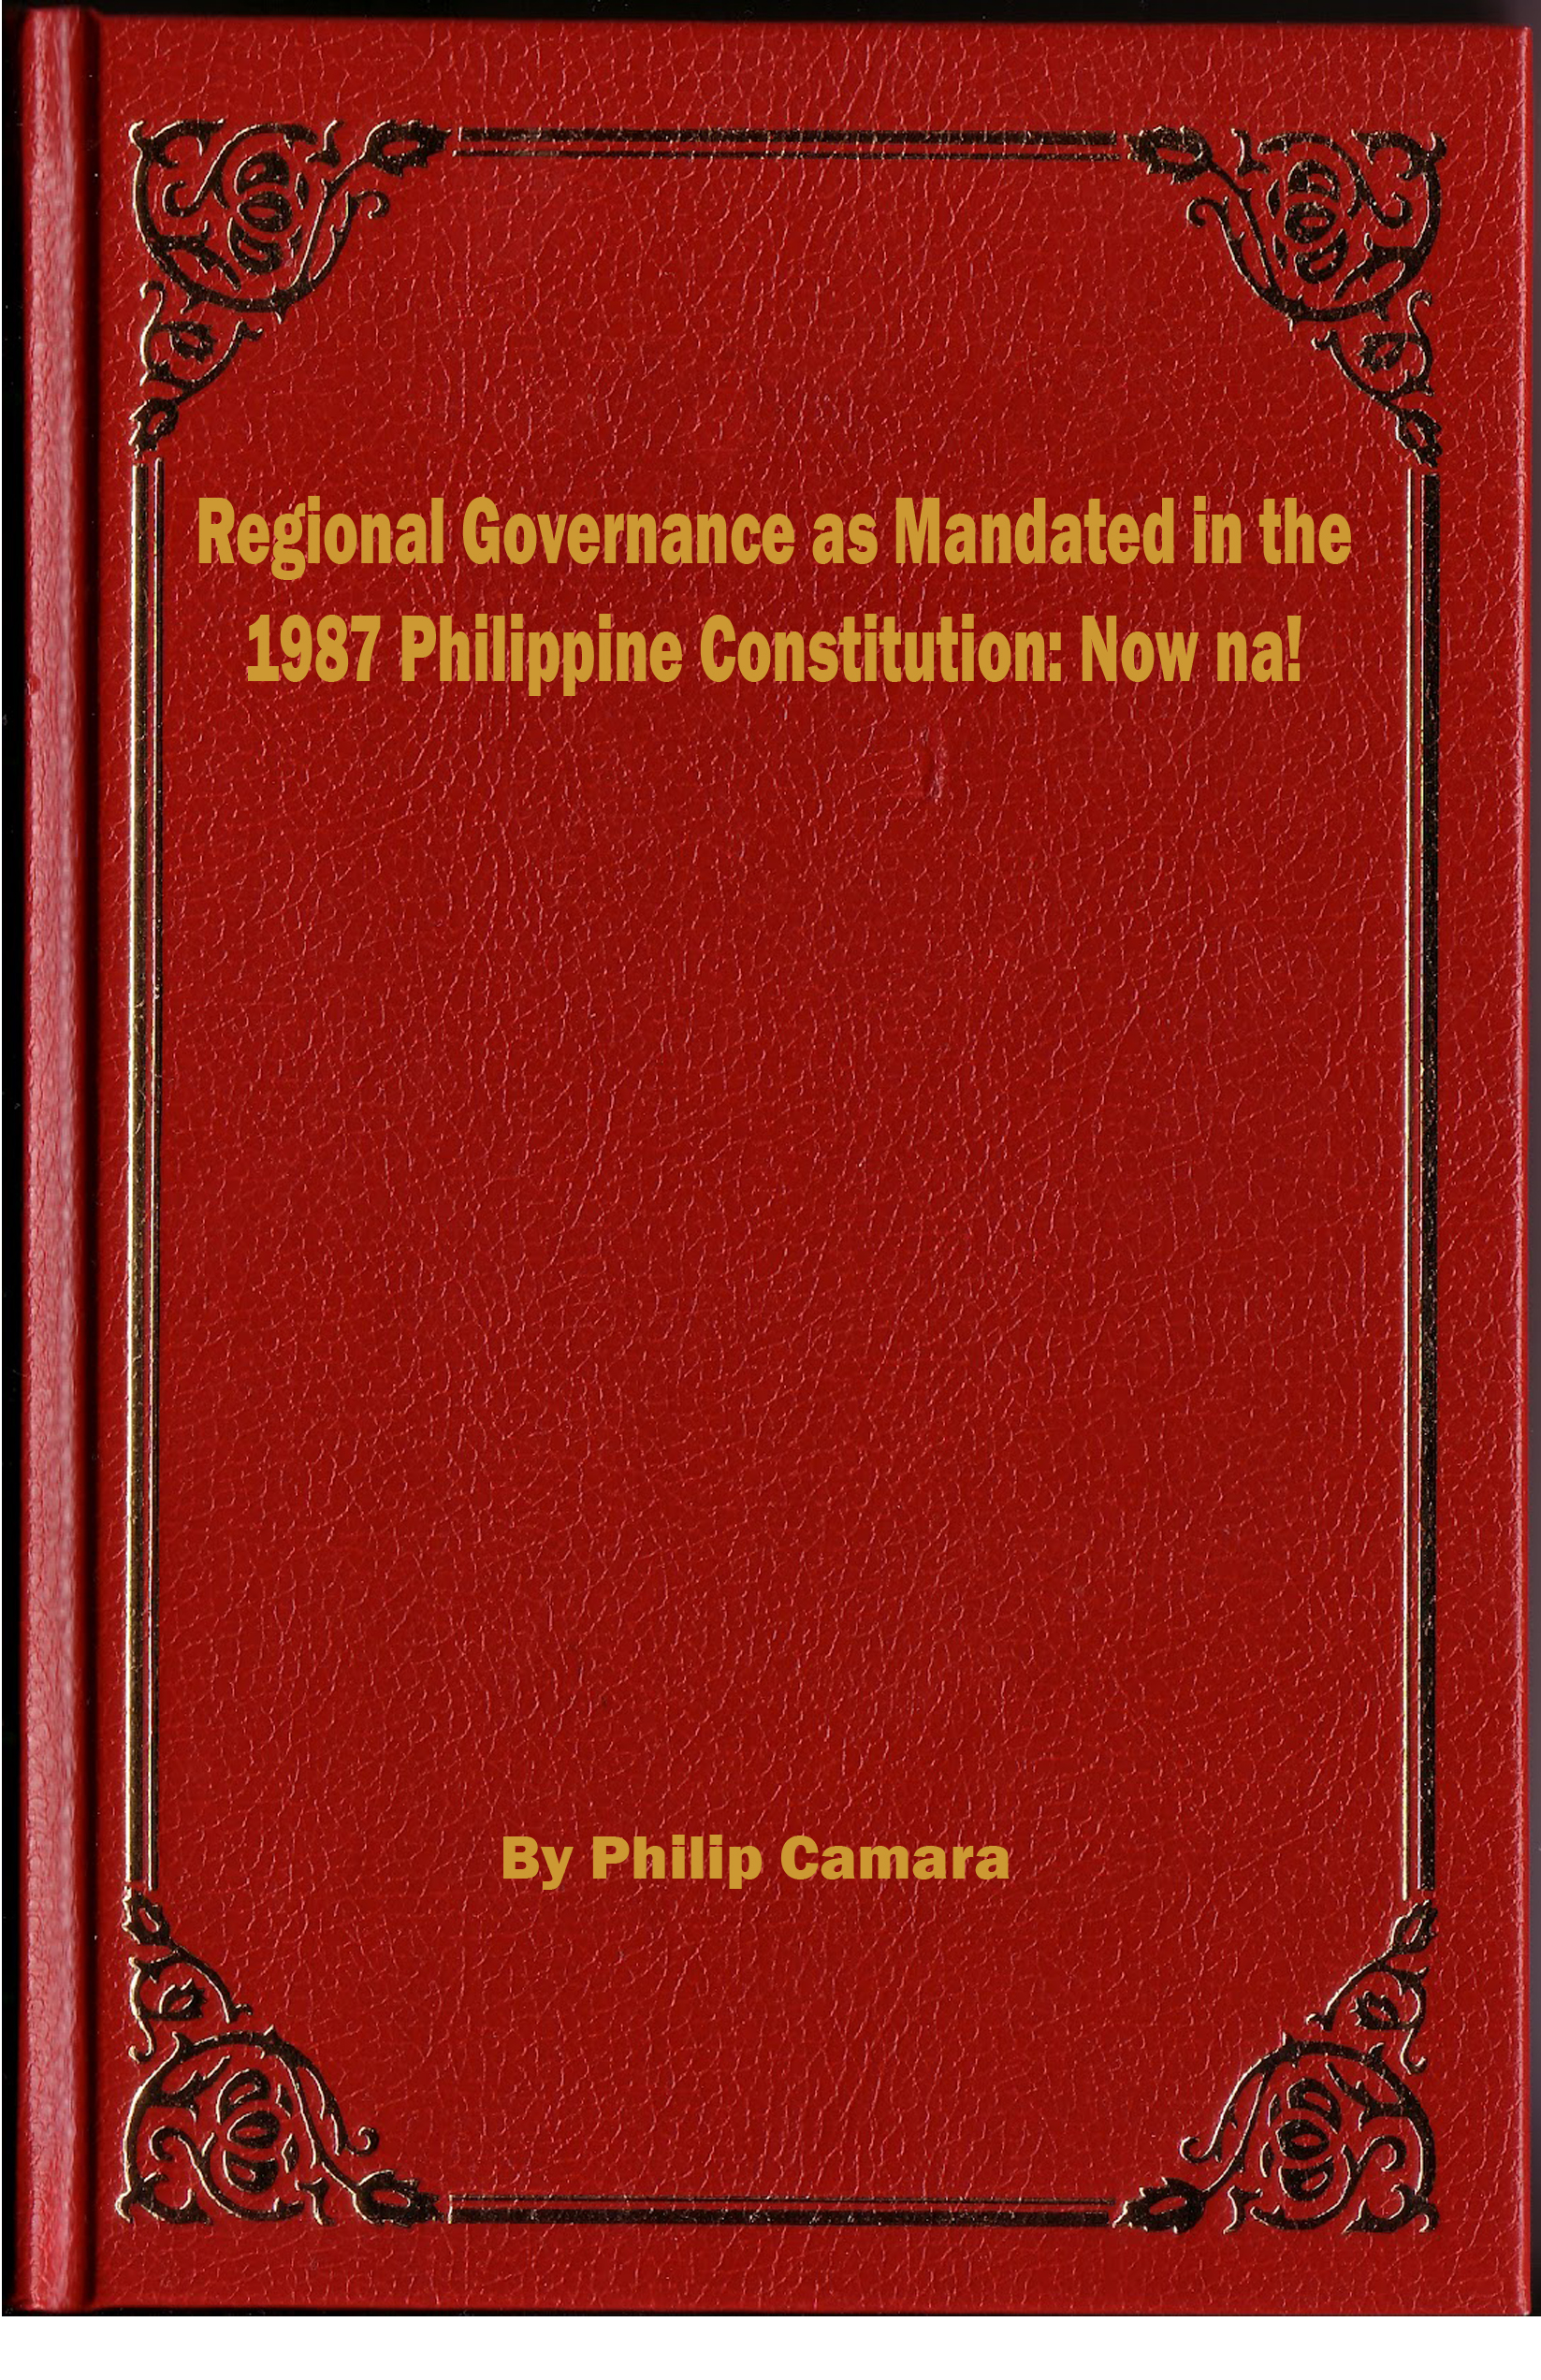 Regional Governance as Mandated in the 1987 Philippines Constitution